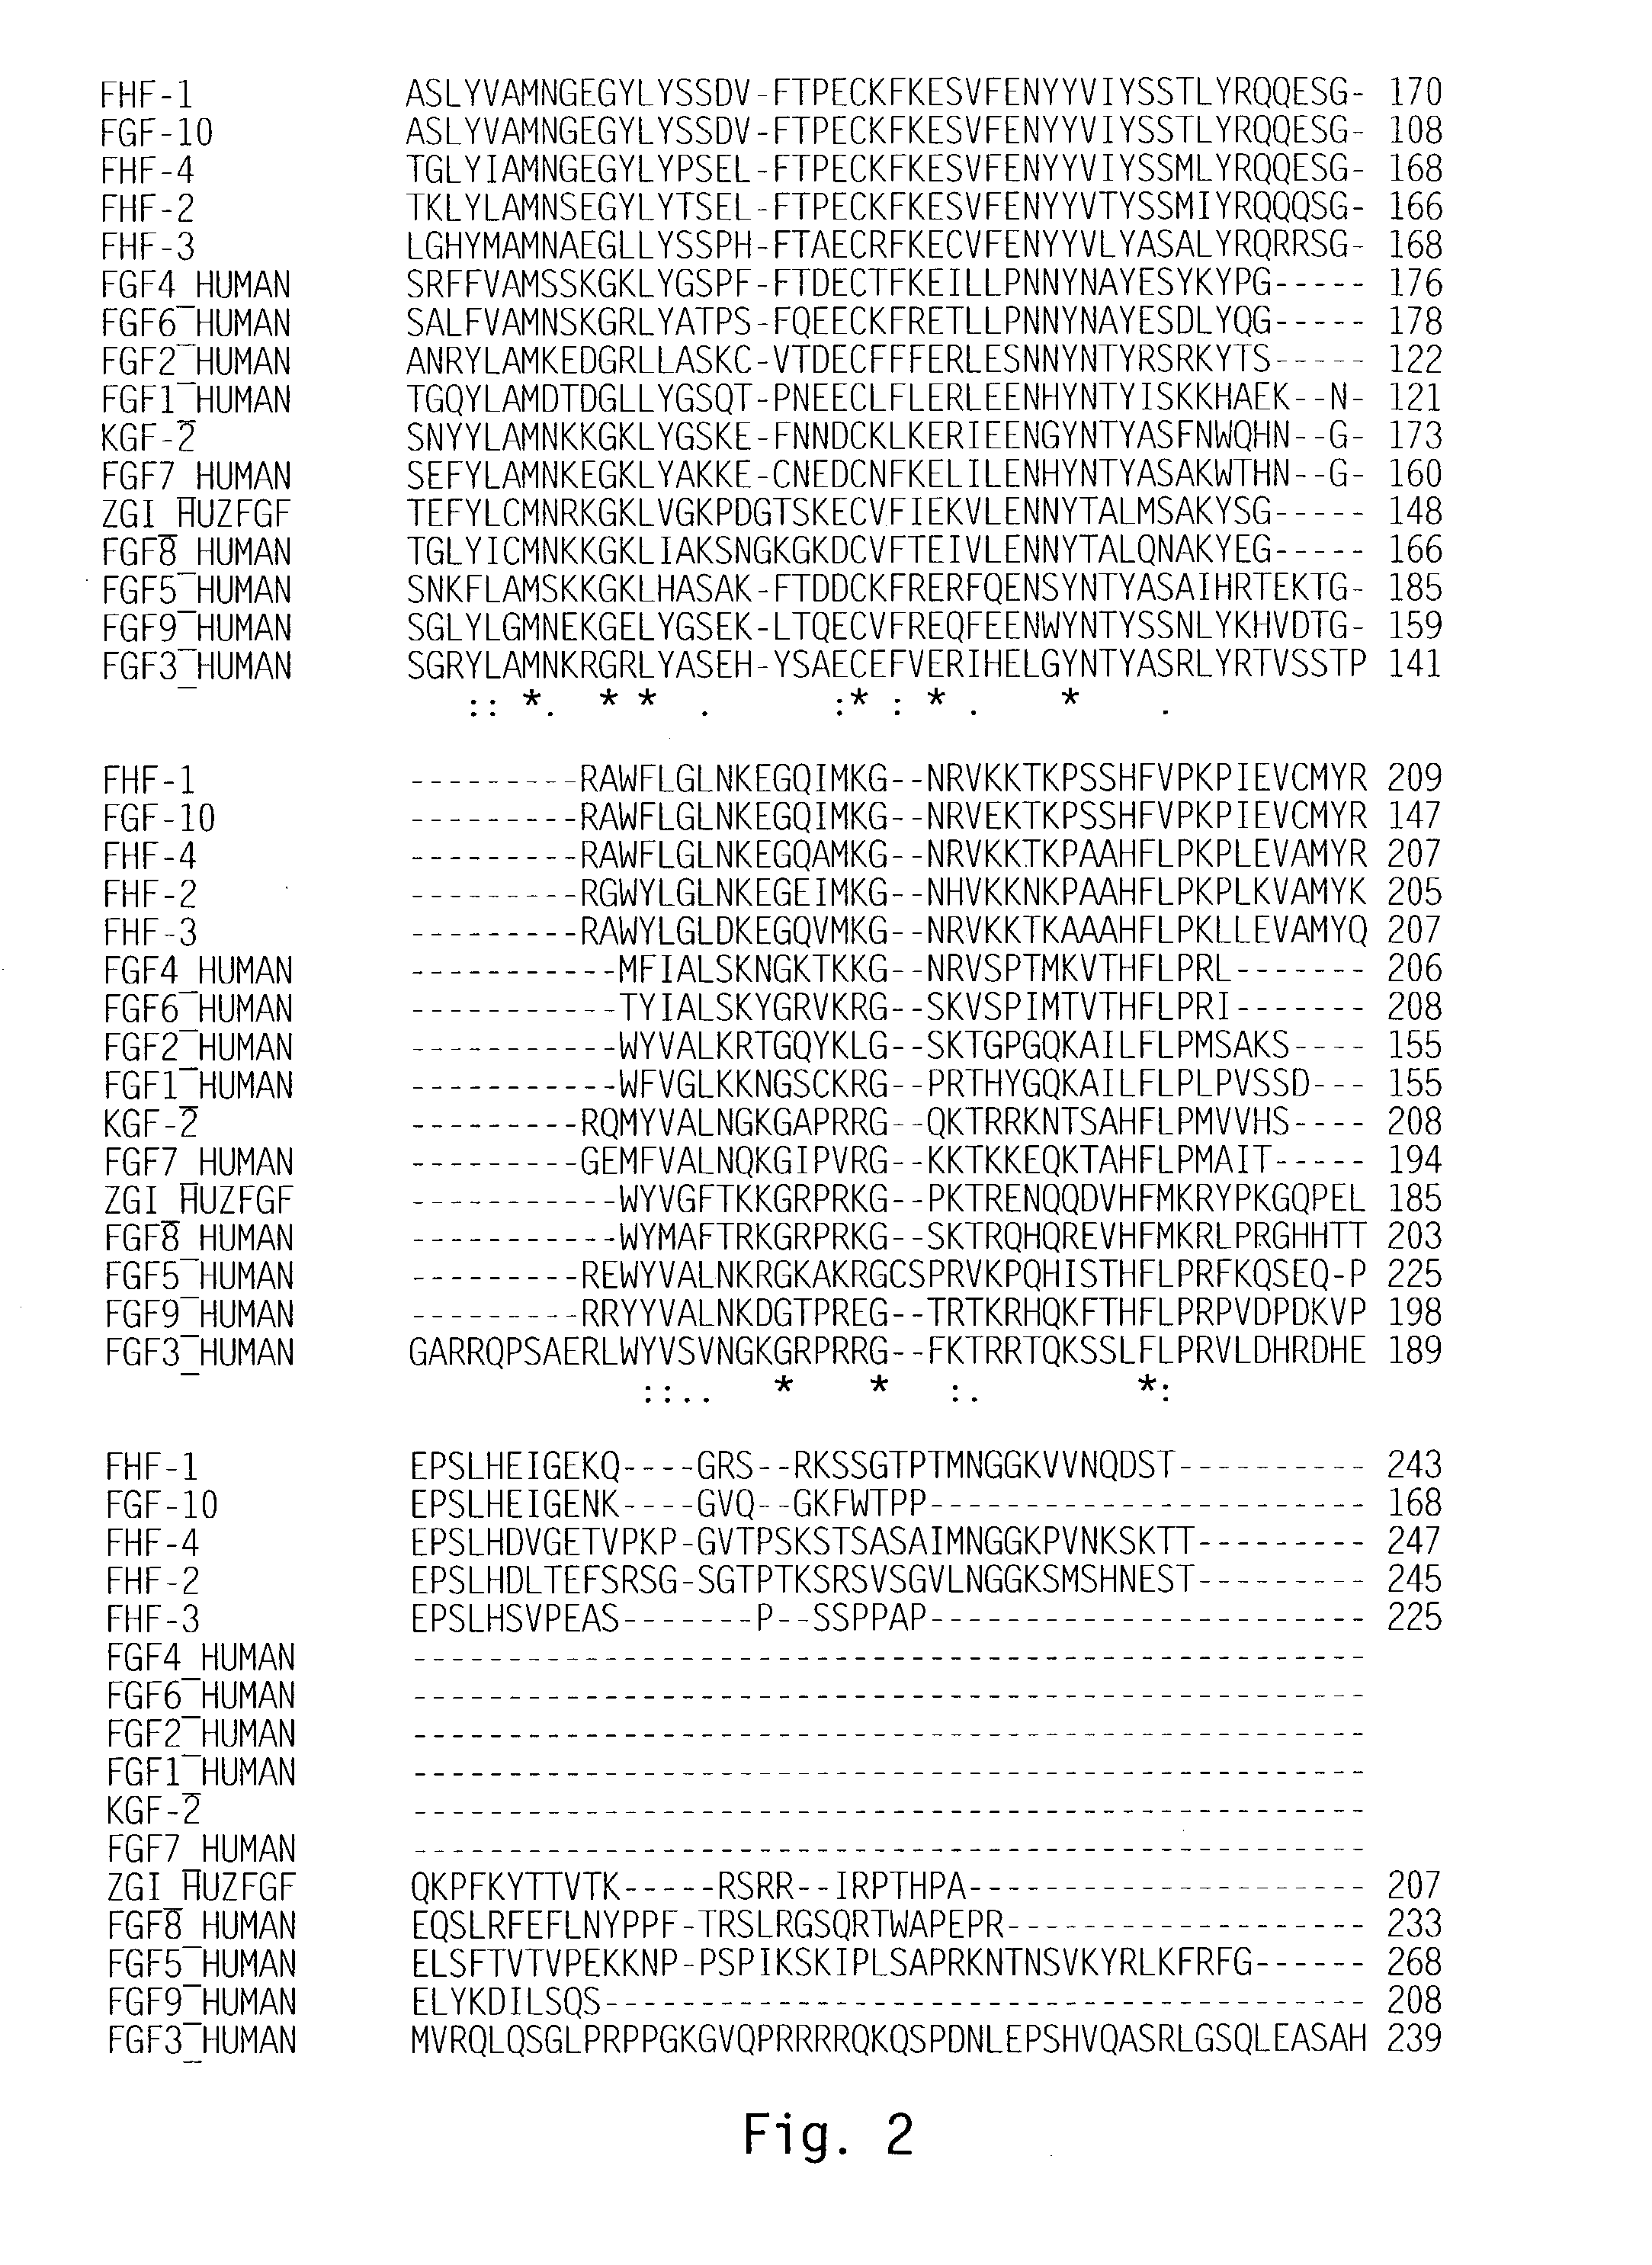 Methods of use of FGF homologs